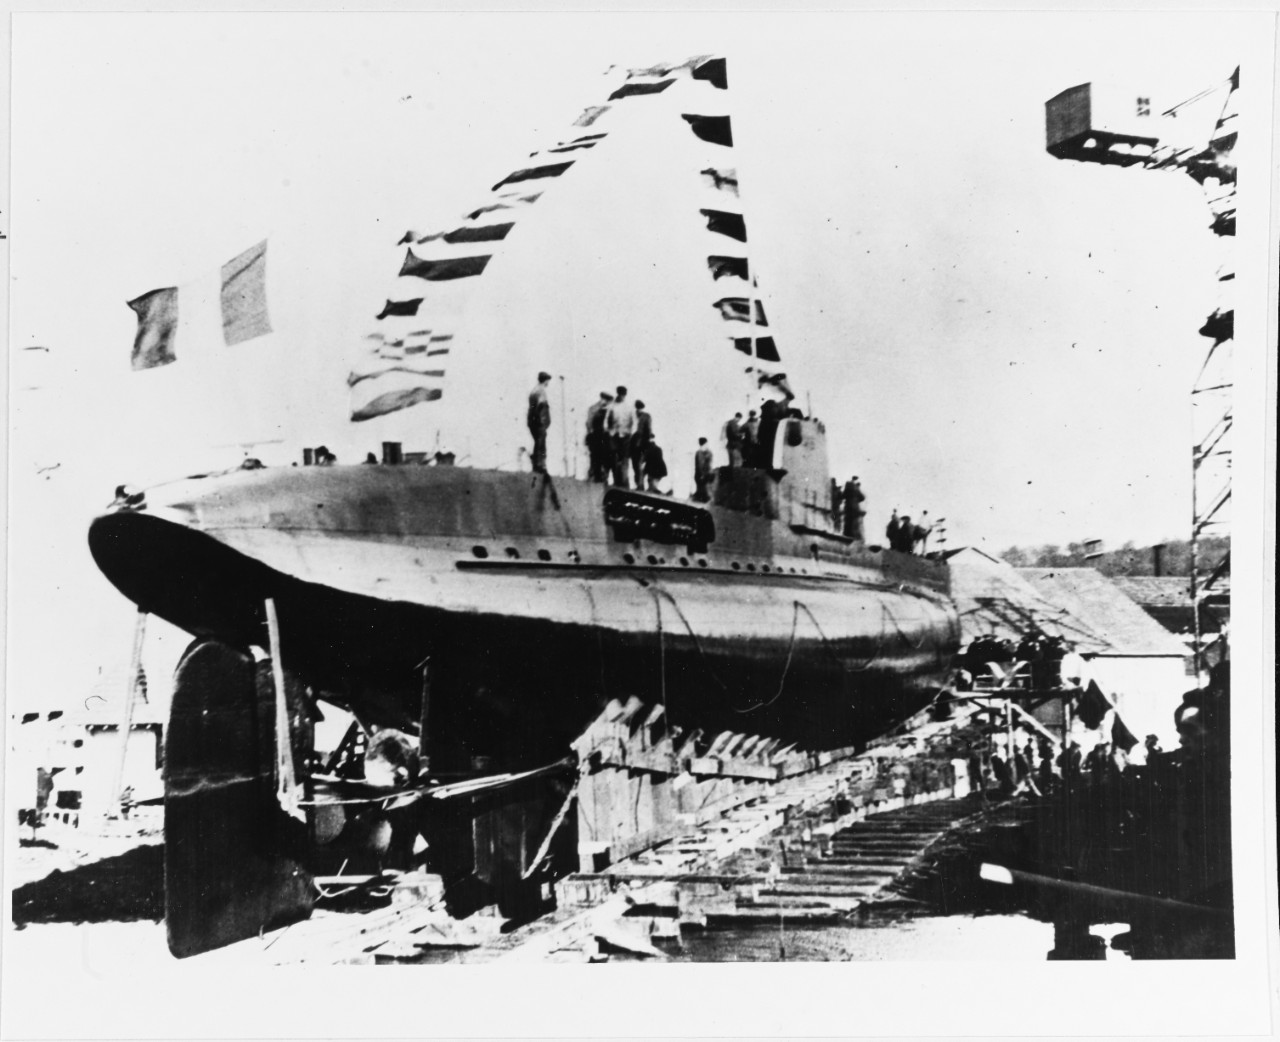 French Diane class second-class submarine at launch in 1934-1938. 